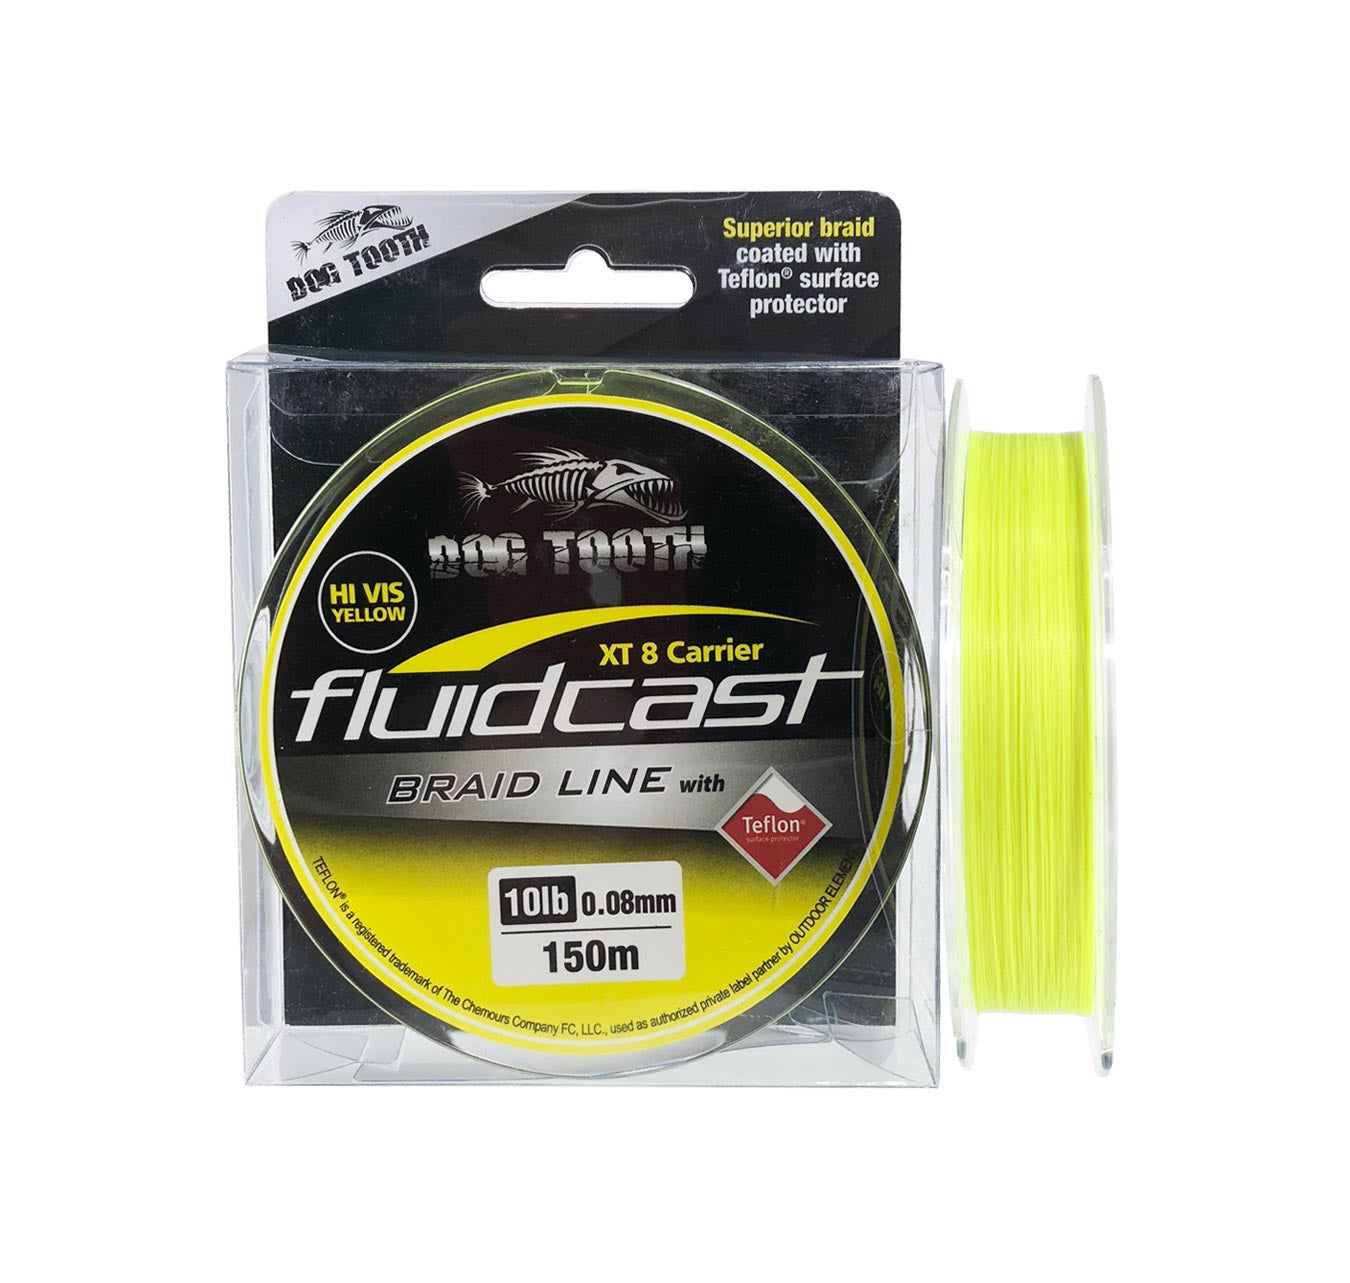 Fluidcast Braid X8 Reef Camo  All Braid Fishing Line for sale in